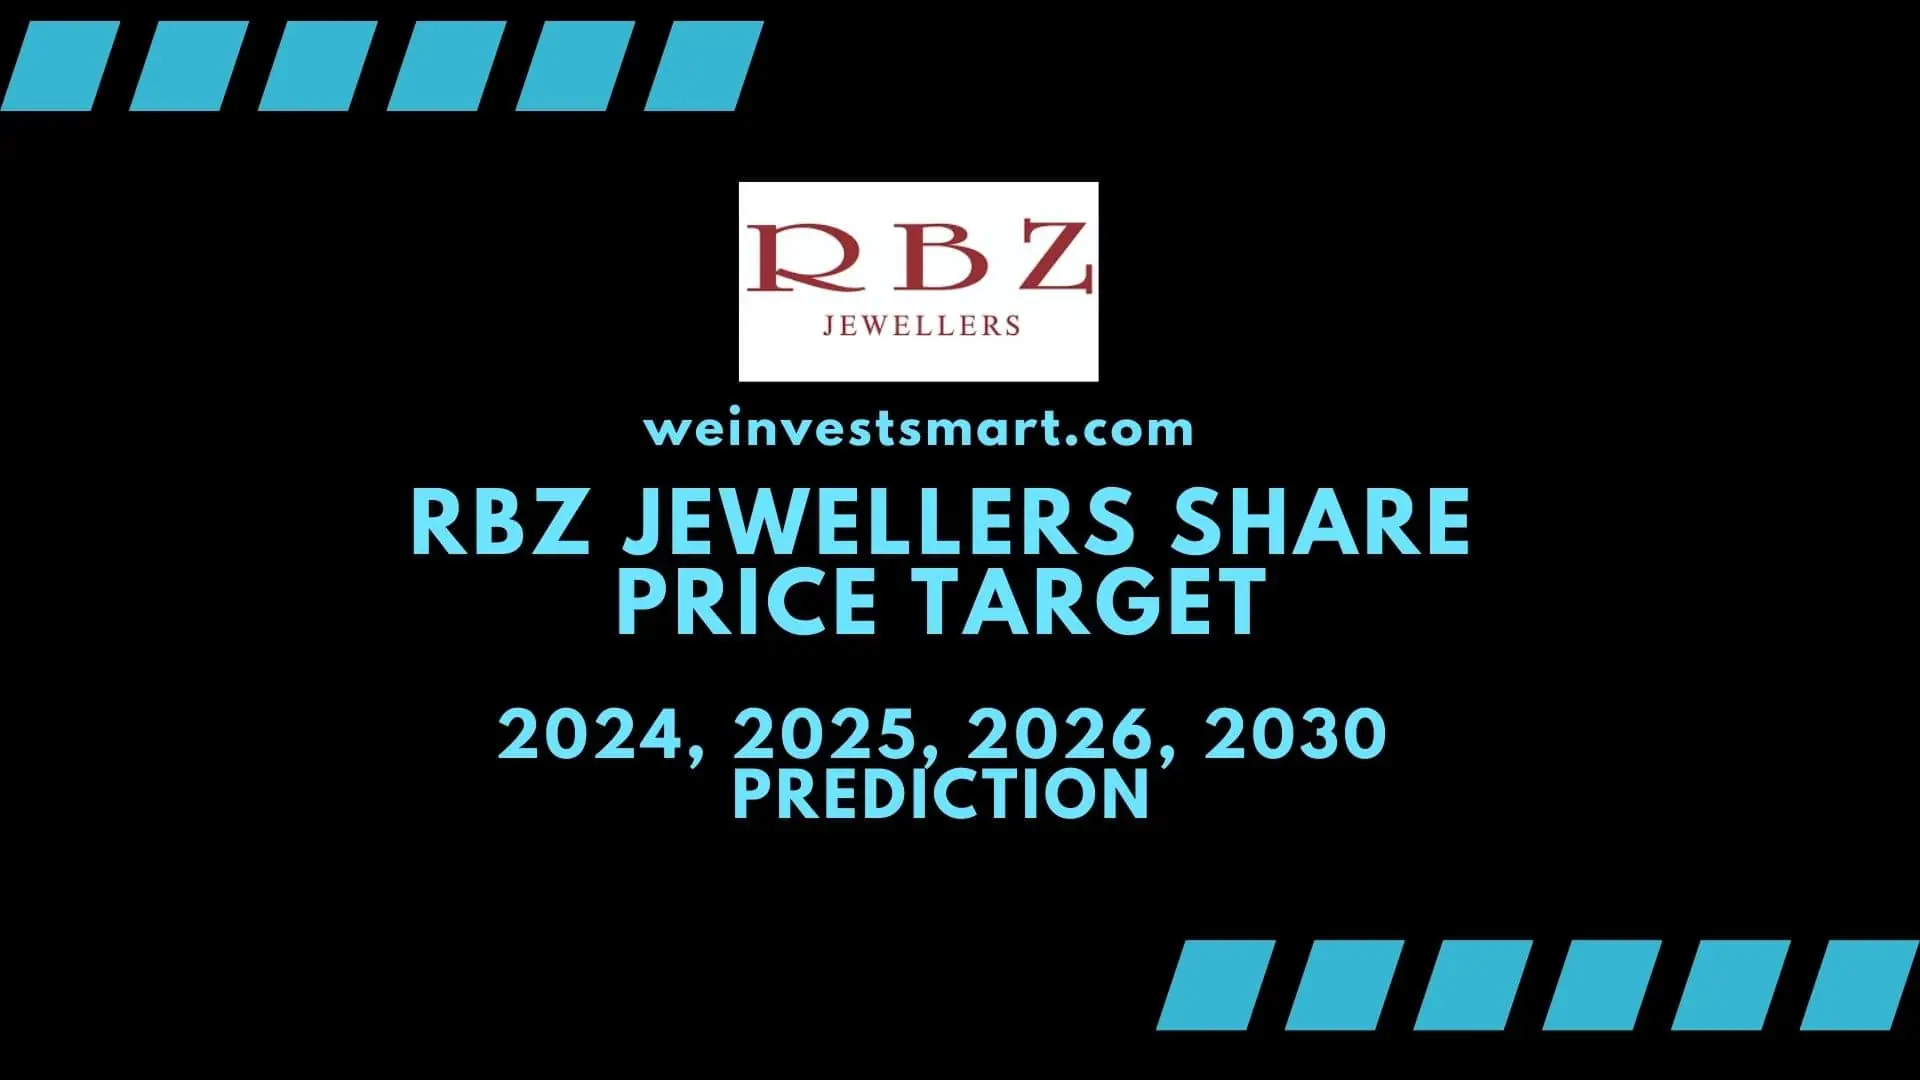 RBZ Jewellers share price target 2024, 2025, 2026, 2030 prediction